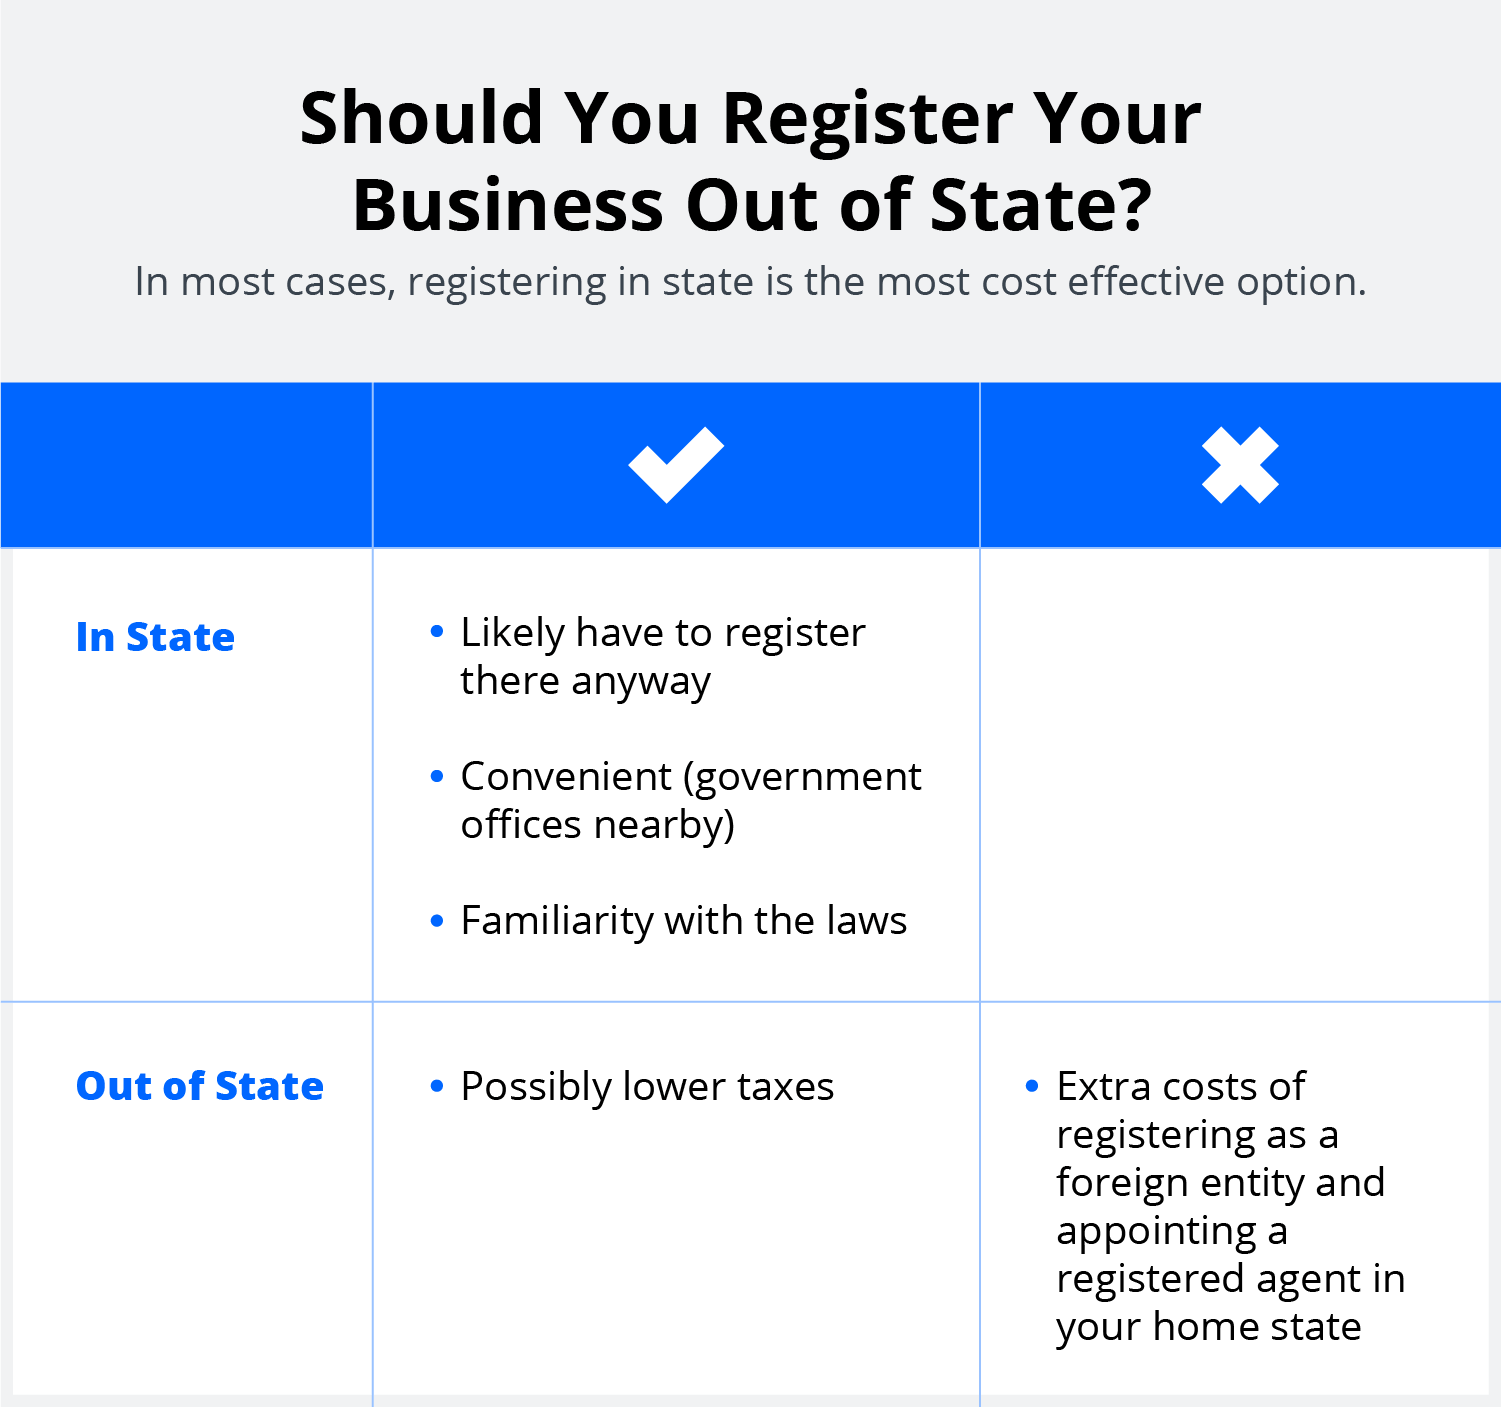 pros and cons of registering a business out of state